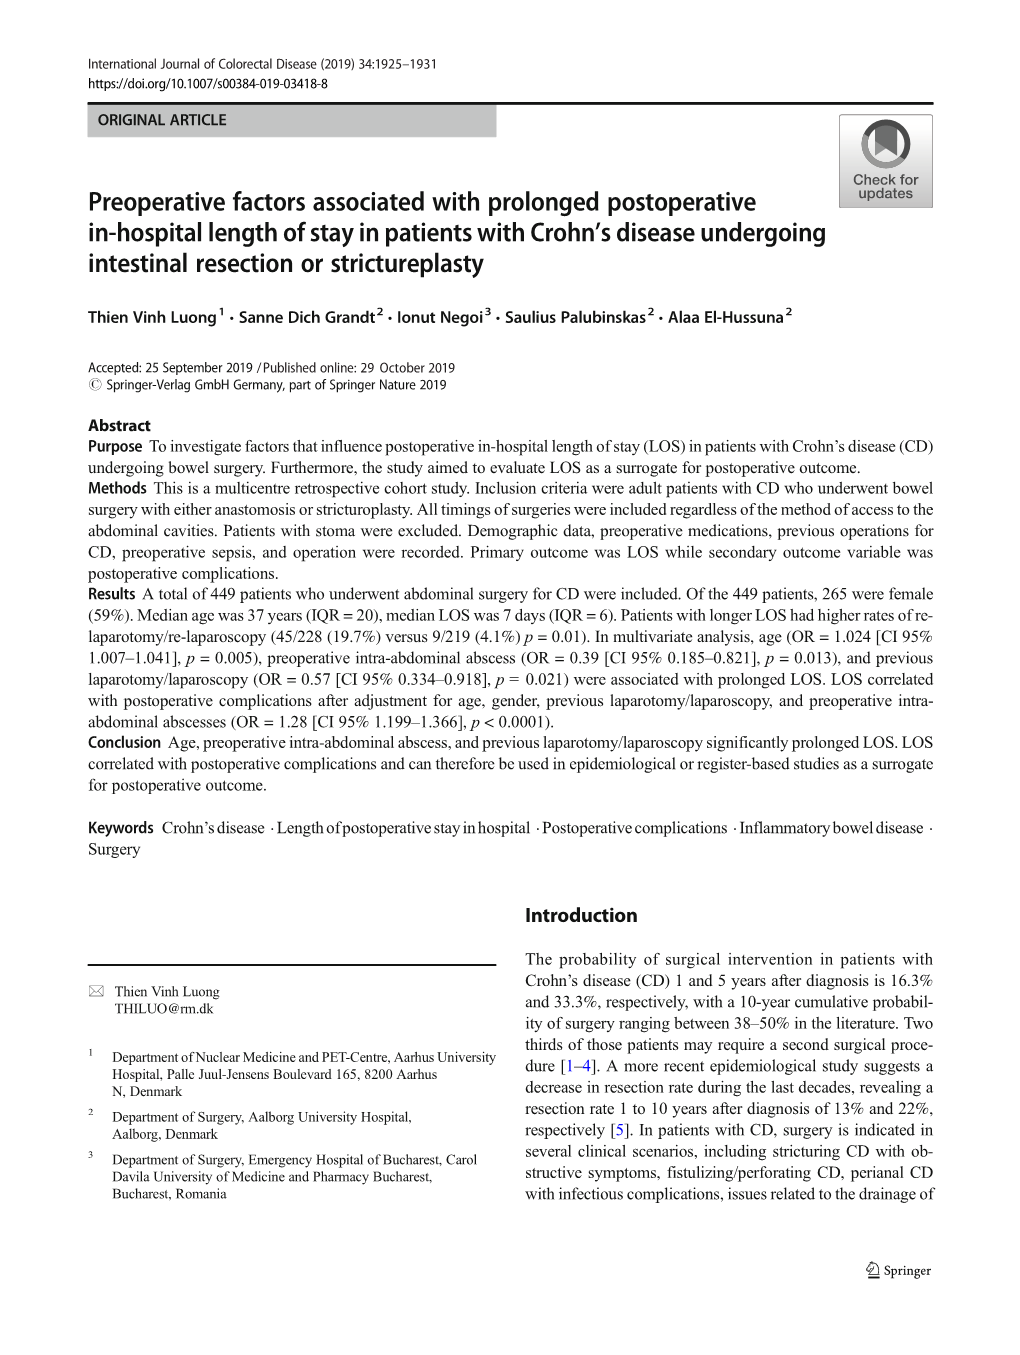 Preoperative Factors Associated with Prolonged Postoperative In-Hospital